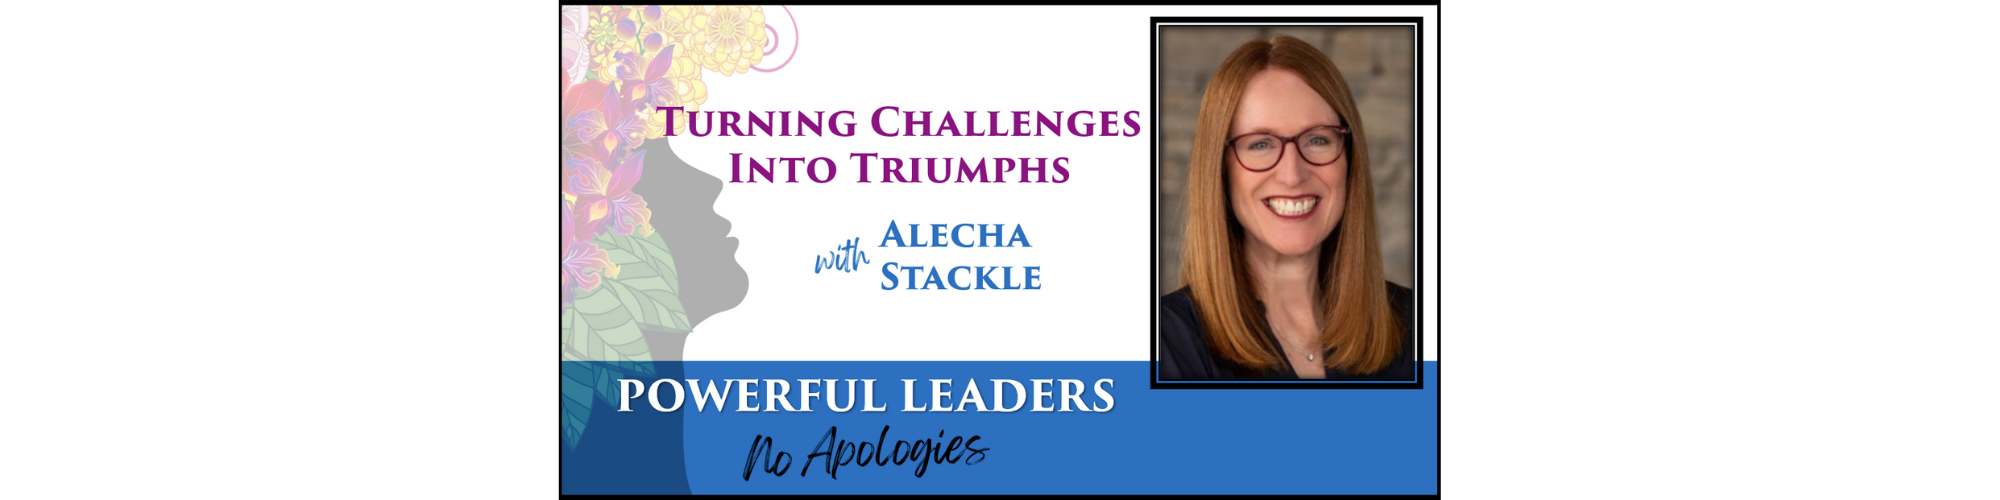 Powerful Leaders, No Apologies Episode #26 Podcast Banner